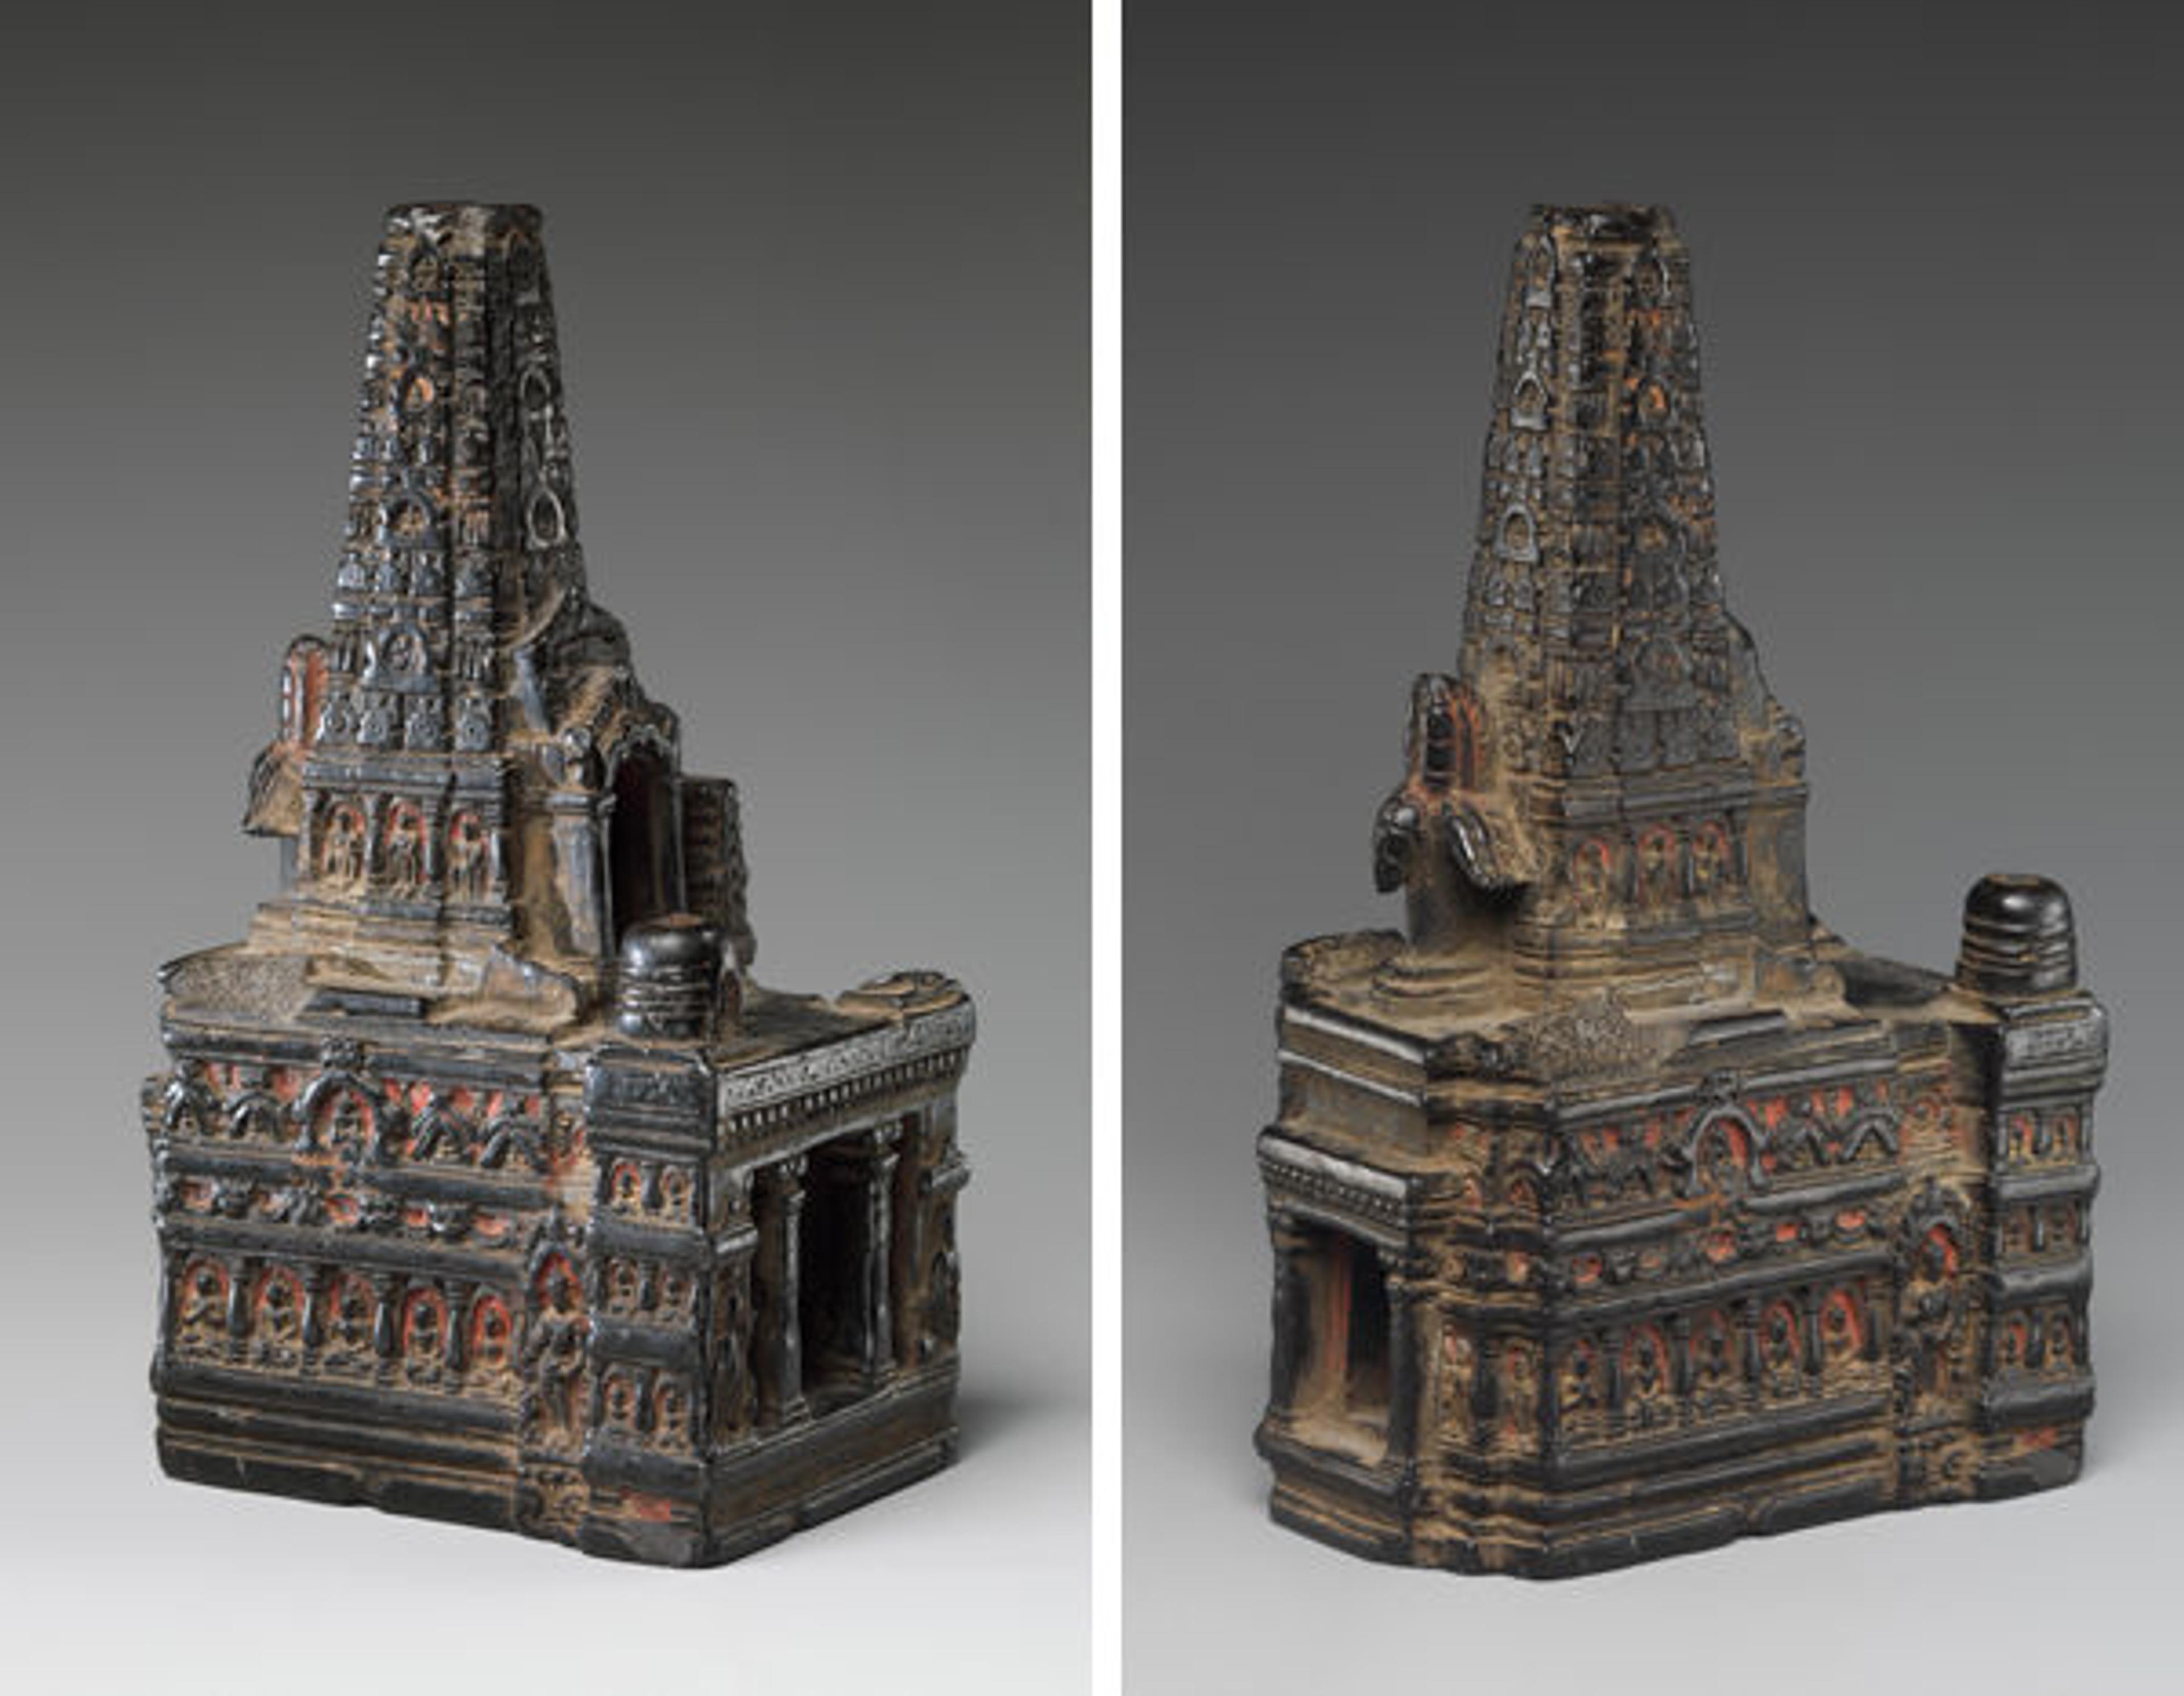 Front and back of a Model of Mahabodhi Temple showing the placement of the Bodhi tree